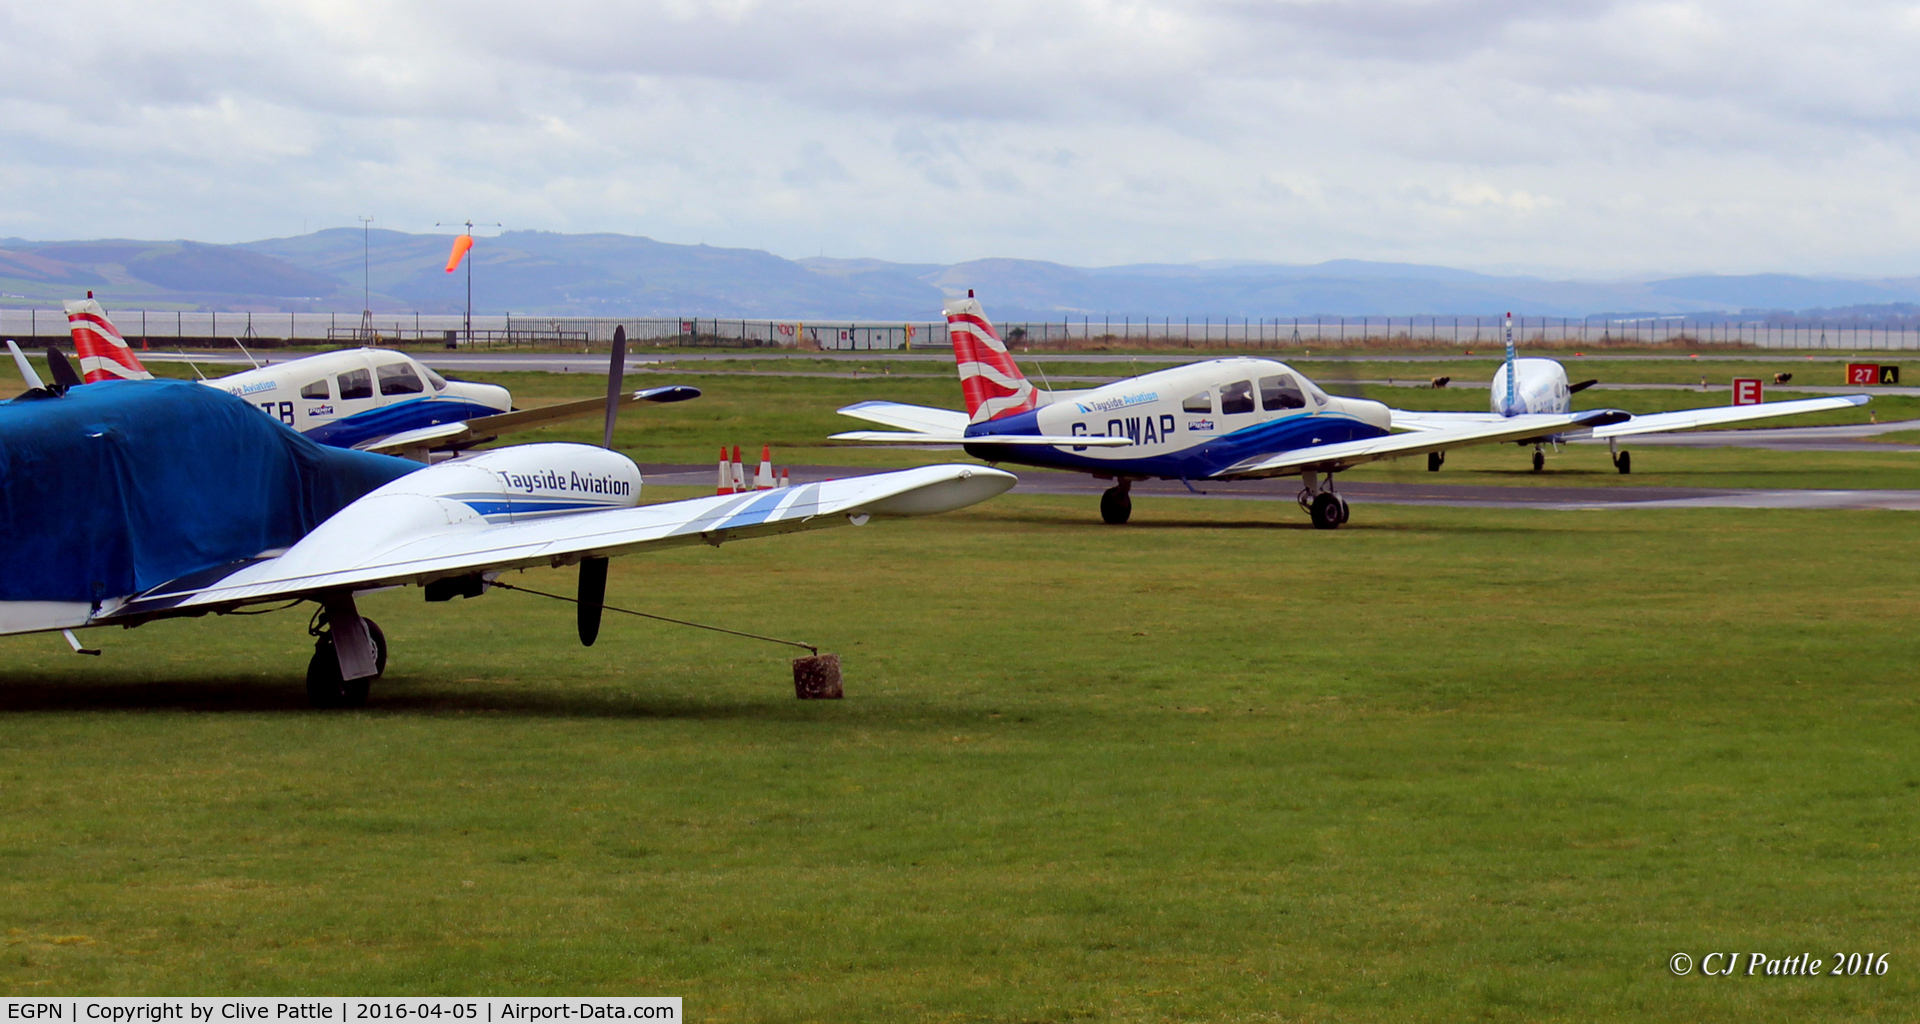 Dundee Airport, Dundee, Scotland United Kingdom (EGPN) - Some of the currently based Tayside Aviation aircraft on the grass dispersal at Dundee Riverside EGPN